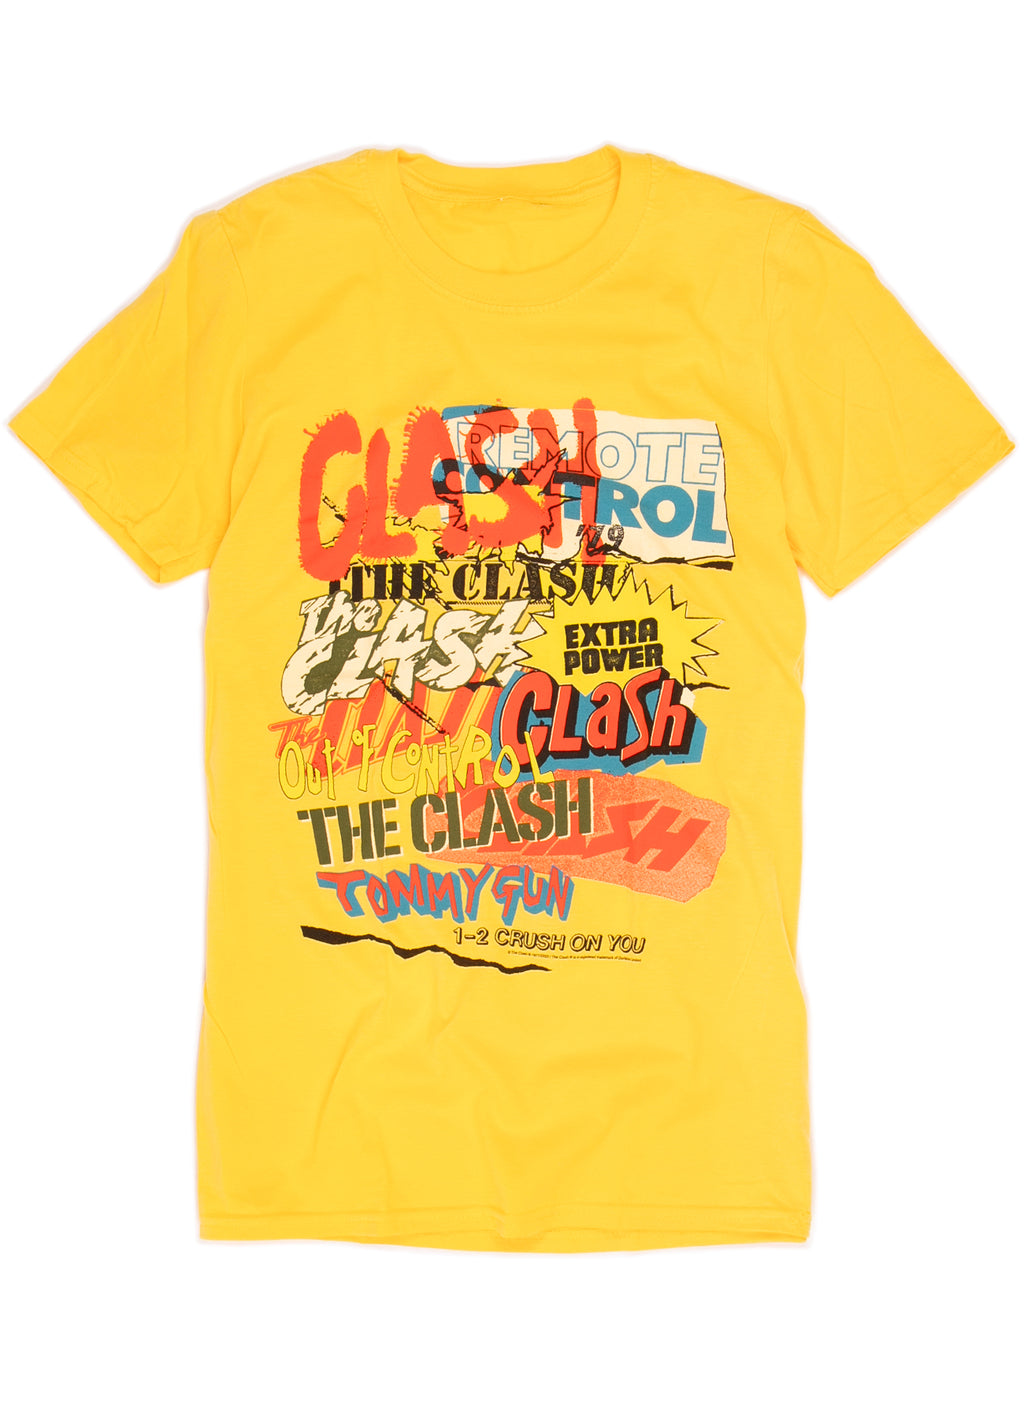 The Clash singles collage t-shirt.